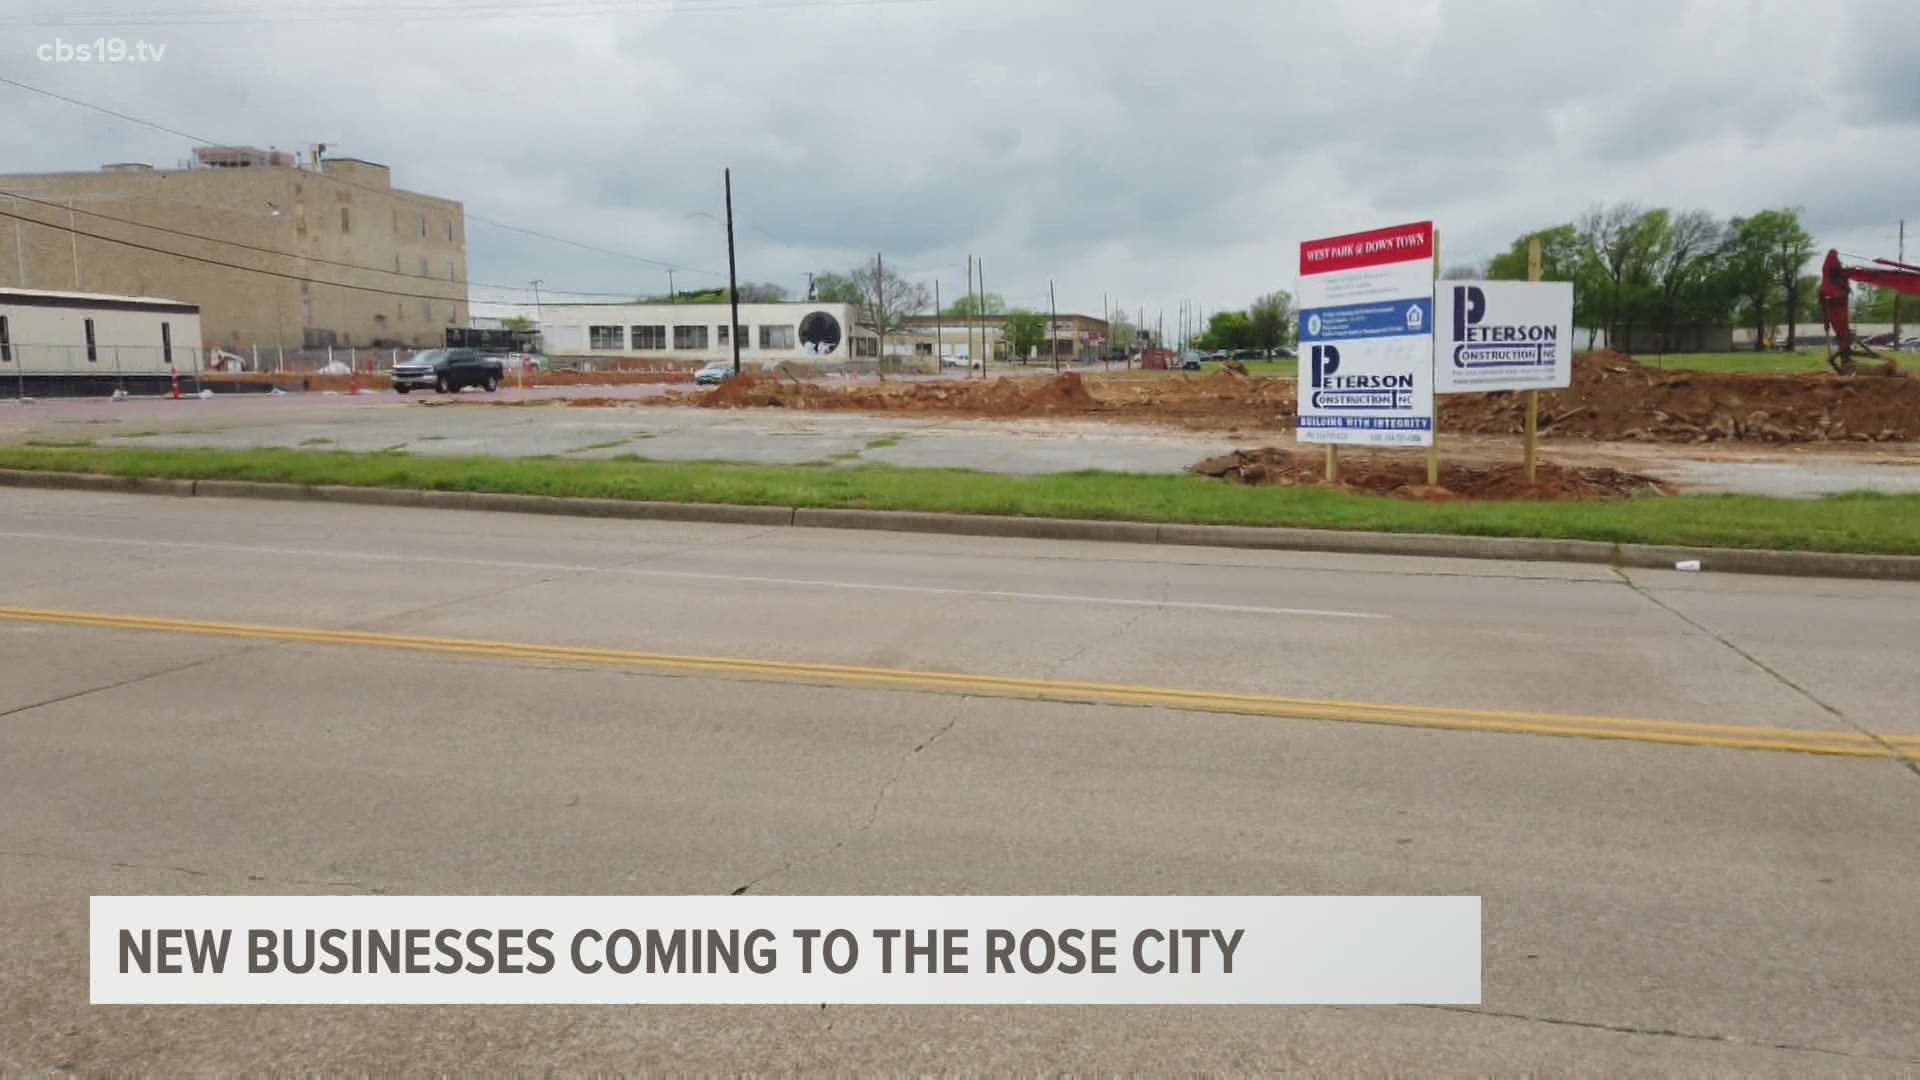 So far, the City of Tyler has issued 38 permits to new businesses in 2021.